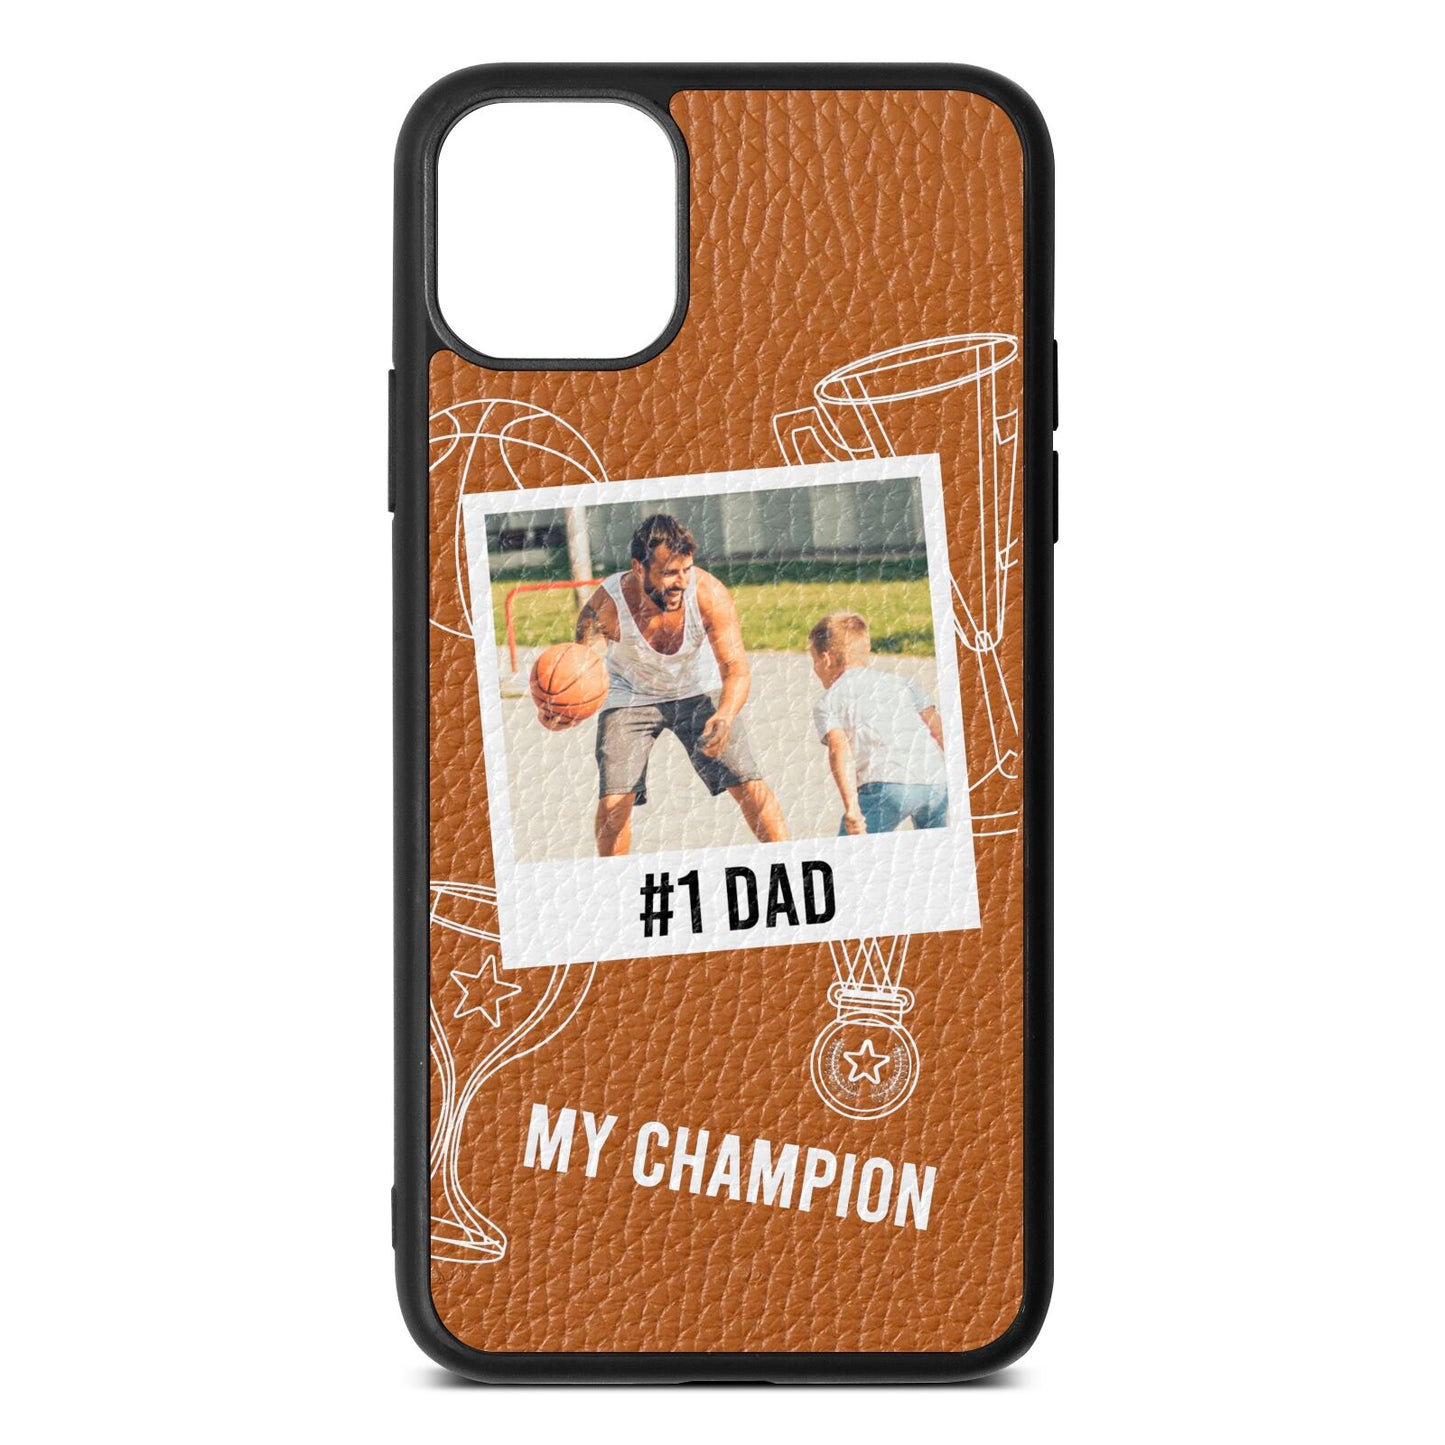 Personalised Number 1 Dad Tan Pebble Leather iPhone 11 Pro Max Case